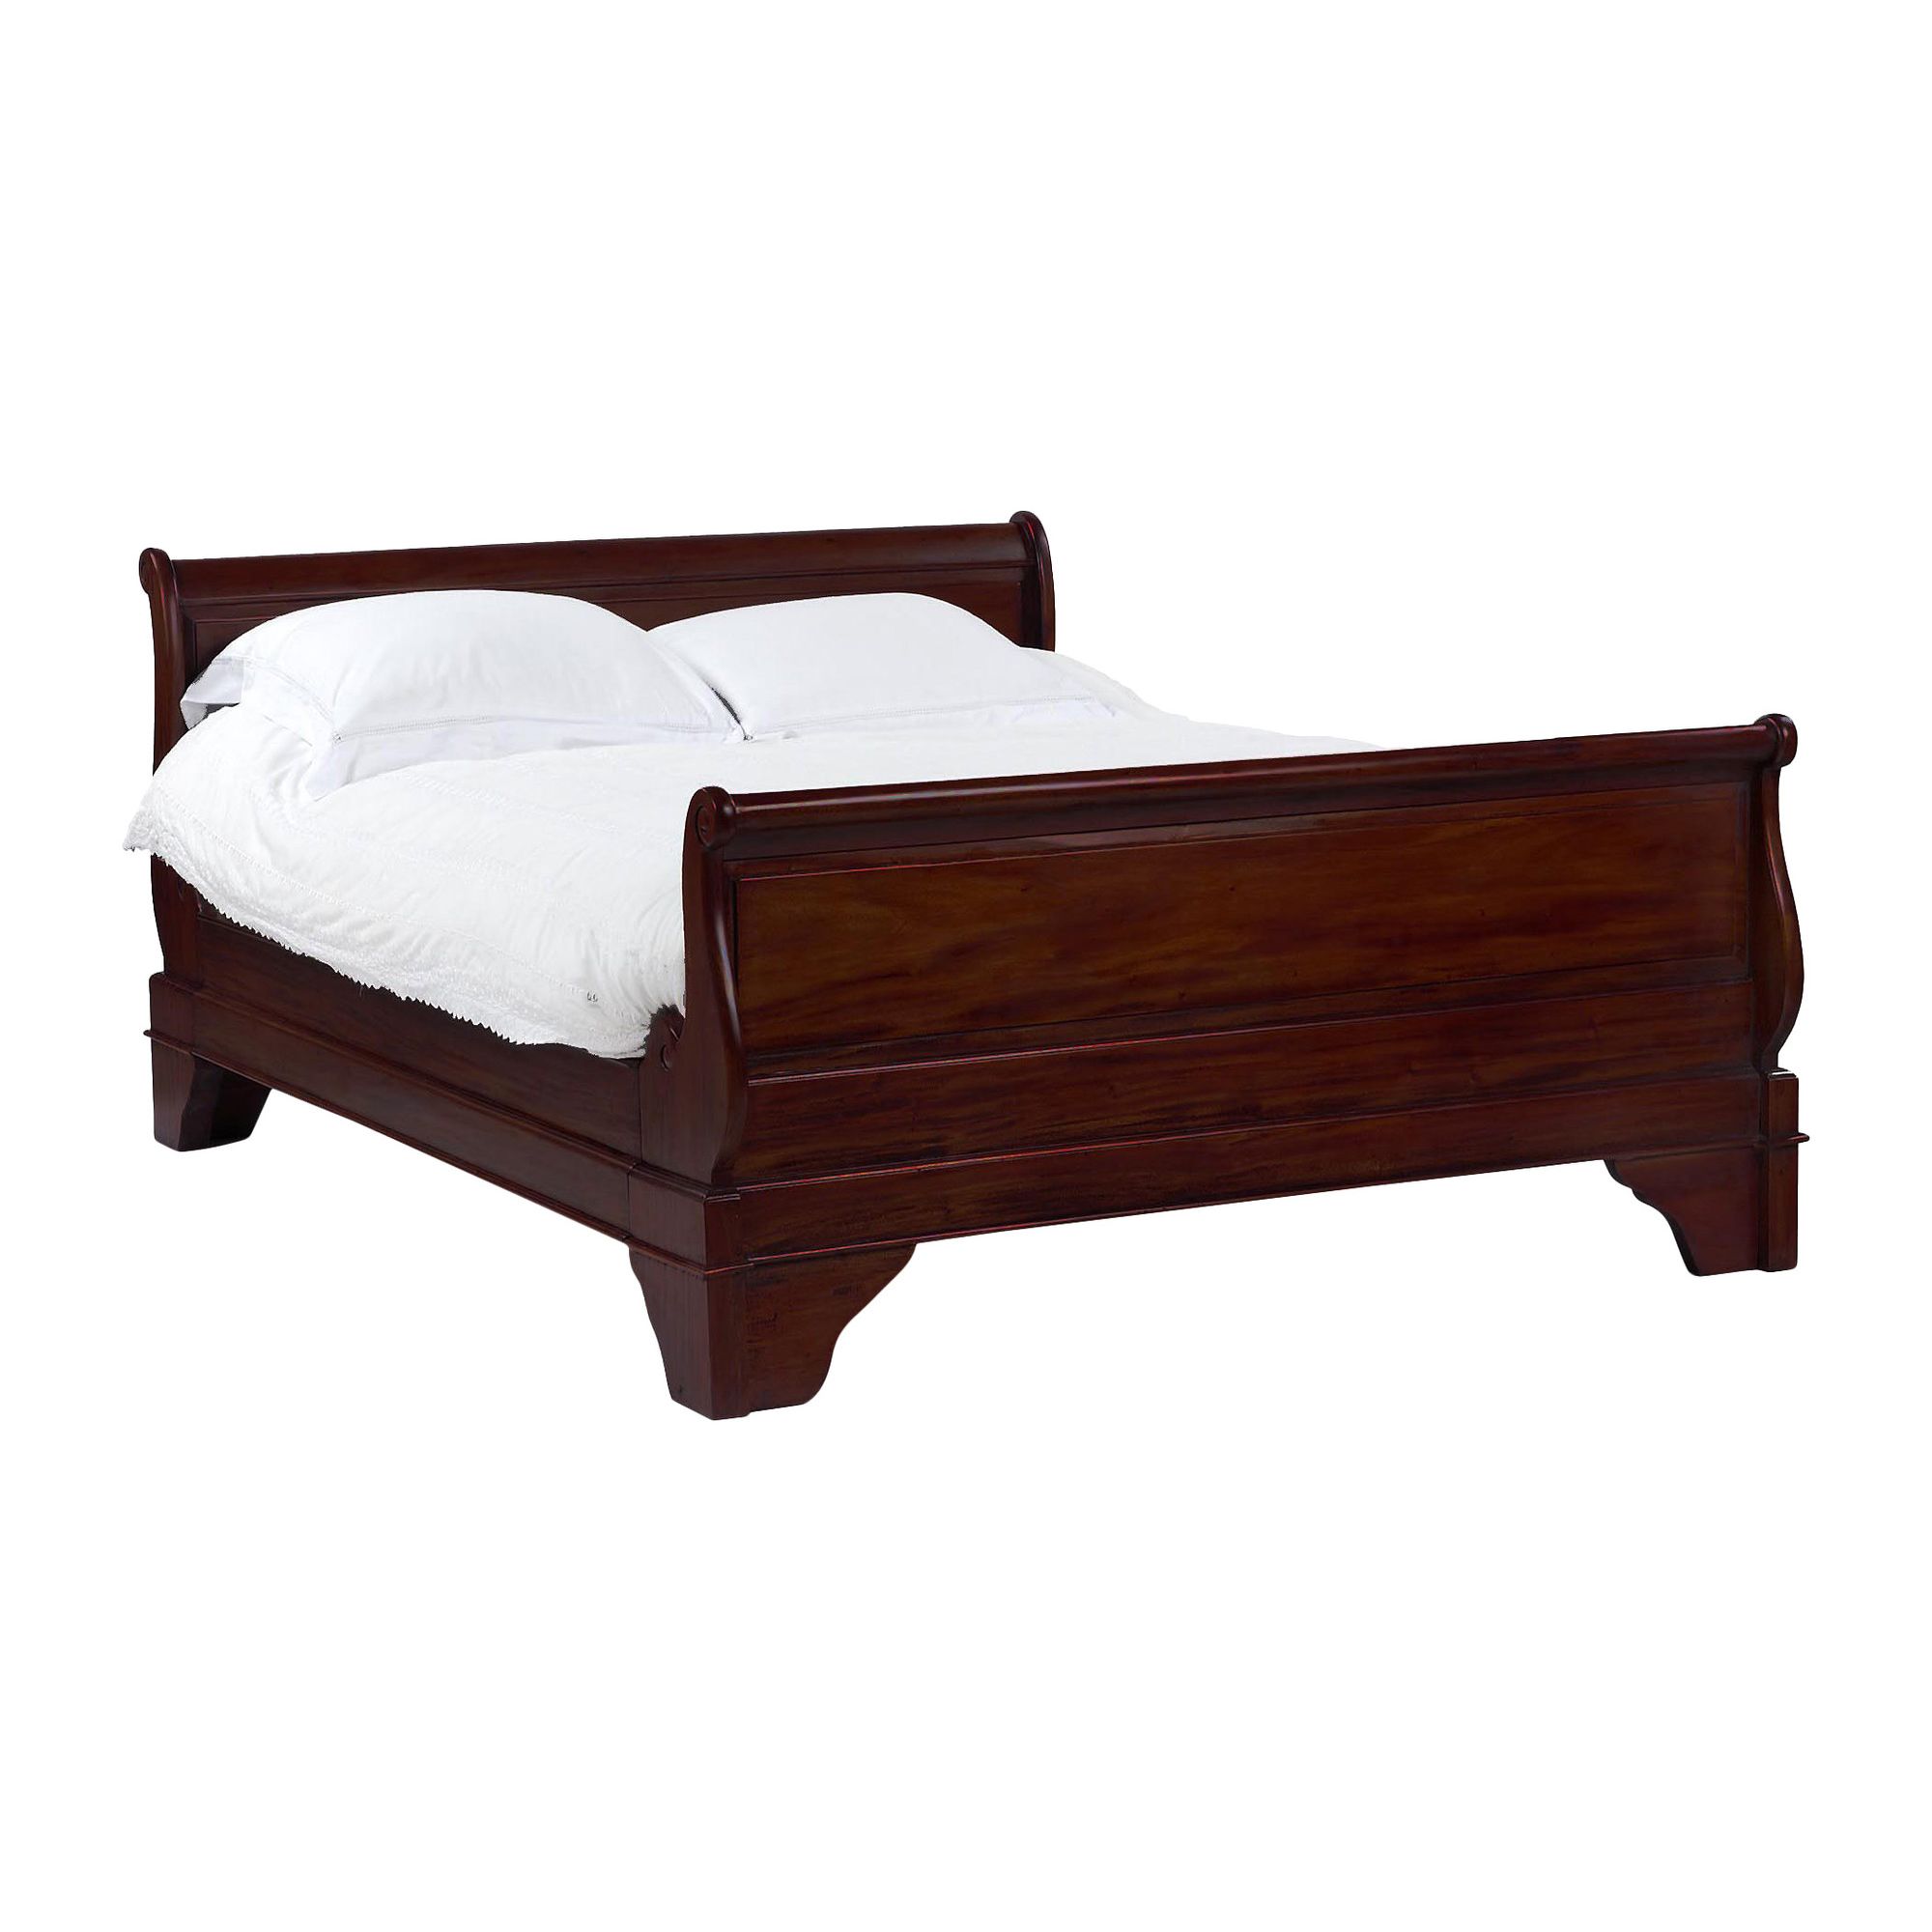 Anderson Bradshaw Colonial French Sleigh Bed Frame - Super King at Tesco Direct